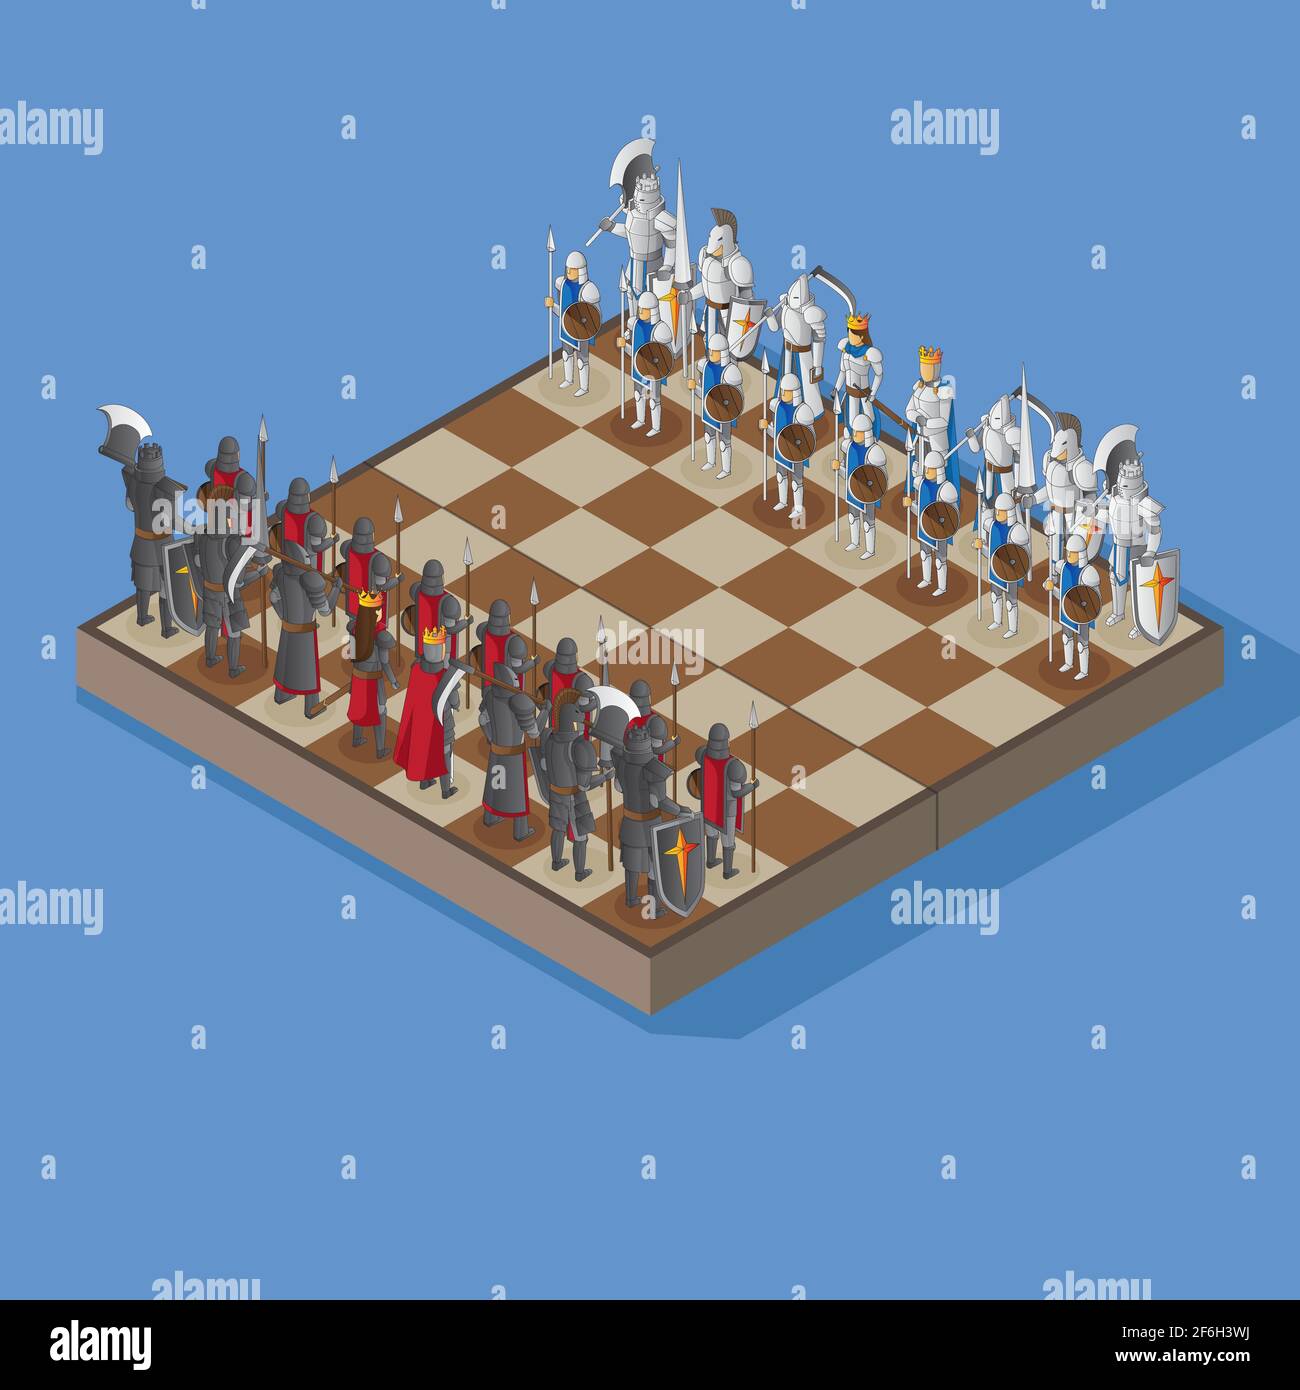 vector illustration of Chessboard with armored human figures in isometric view Stock Vector